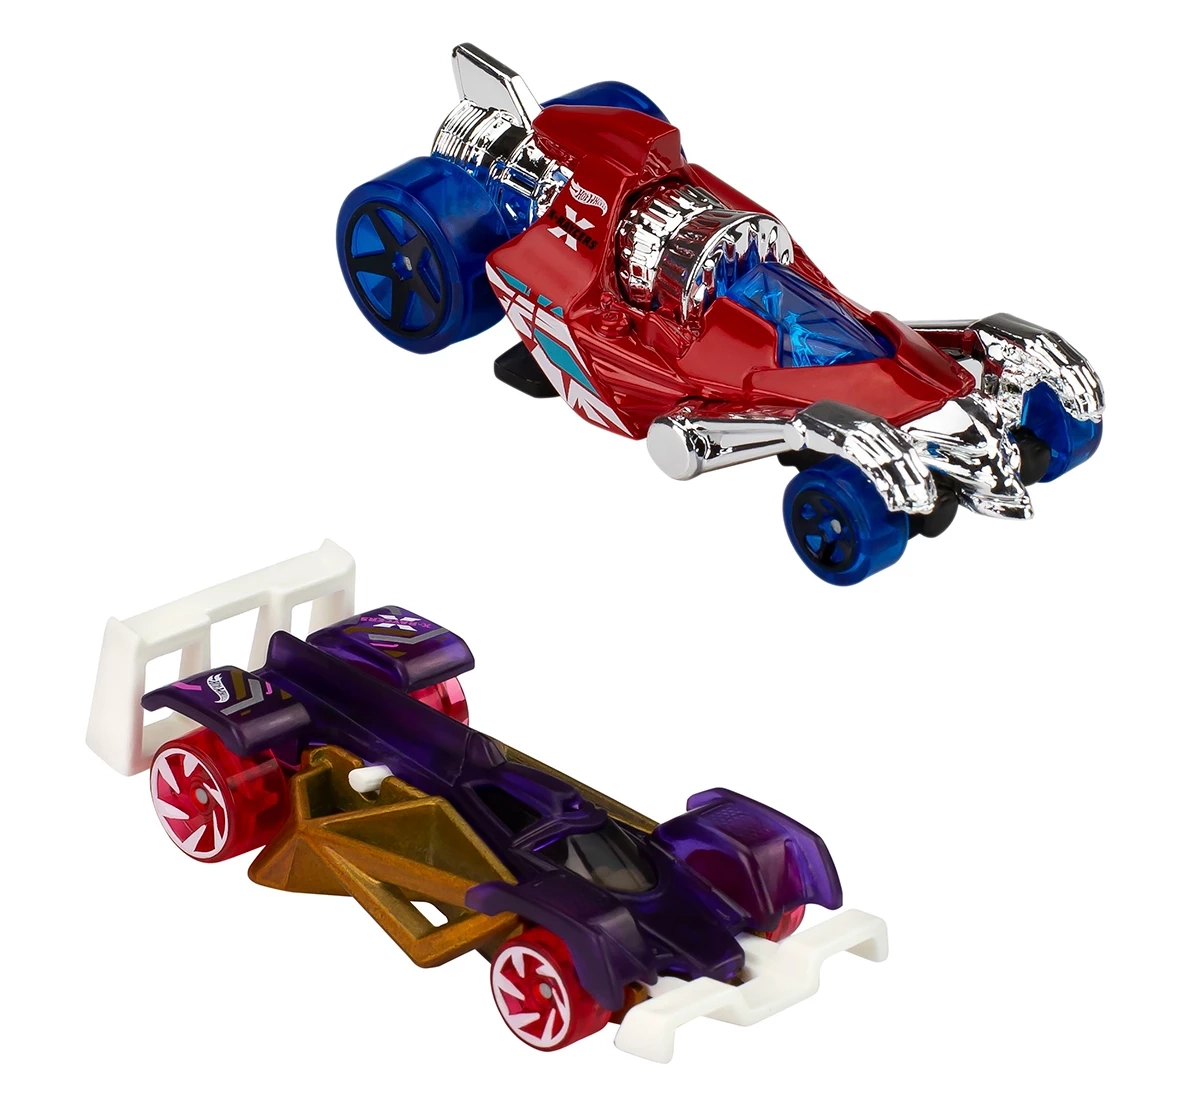 Hot Wheels 3Inch Die-Cast 2 Pack Assorted,Boys,3Y+,Multicolour